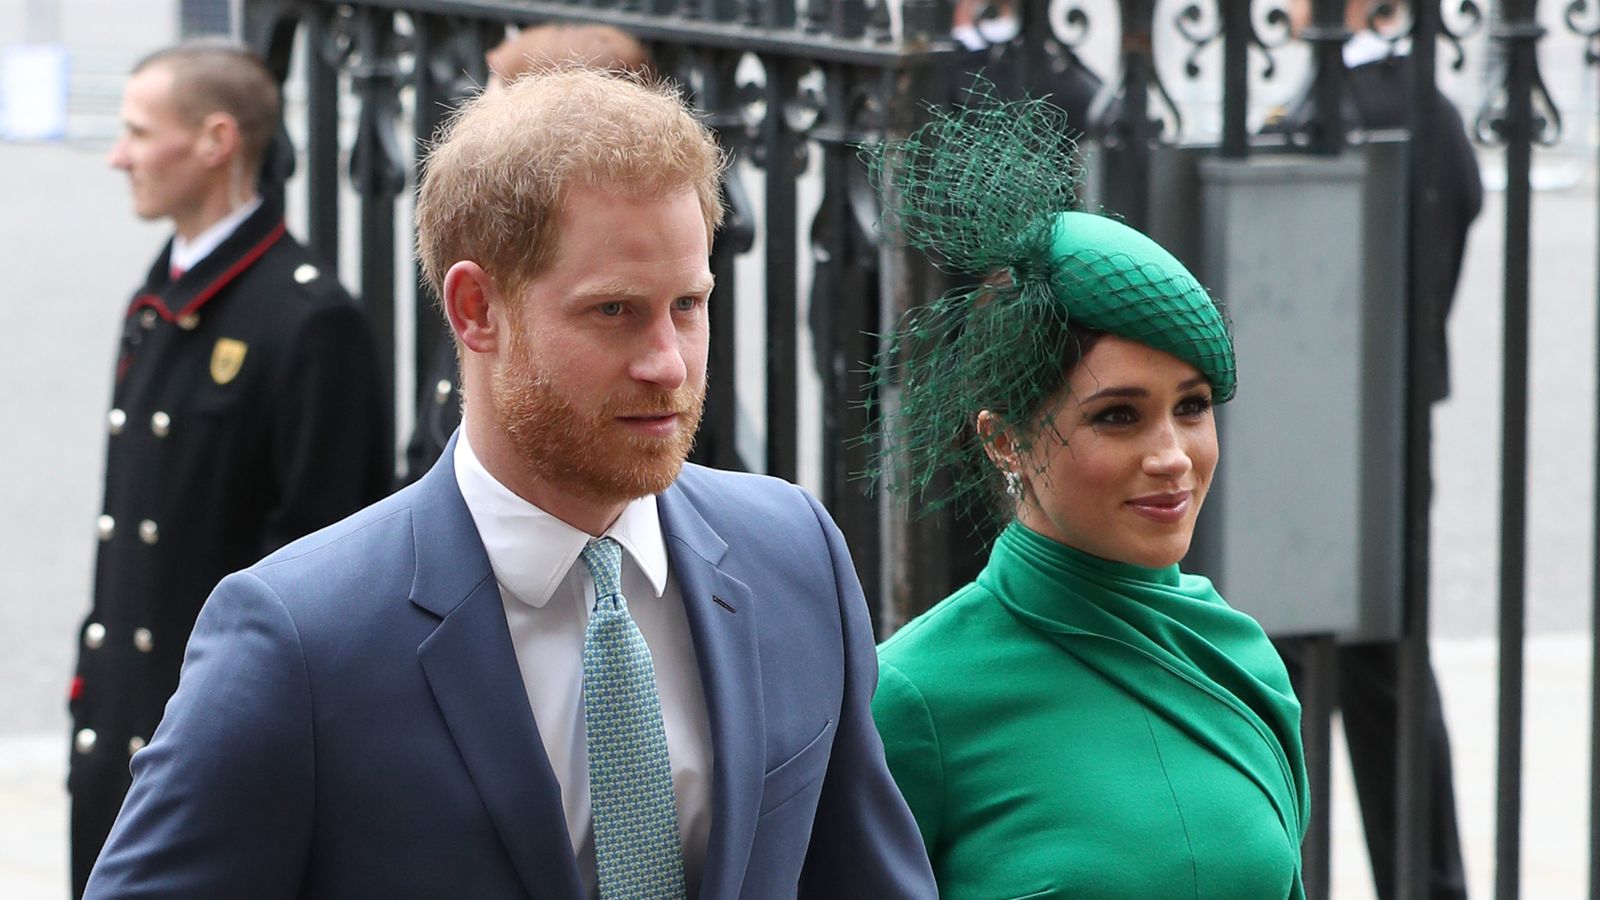 Duke and Duchess of Sussex receive official invite to coronation of King Charles, couple's representative indicates